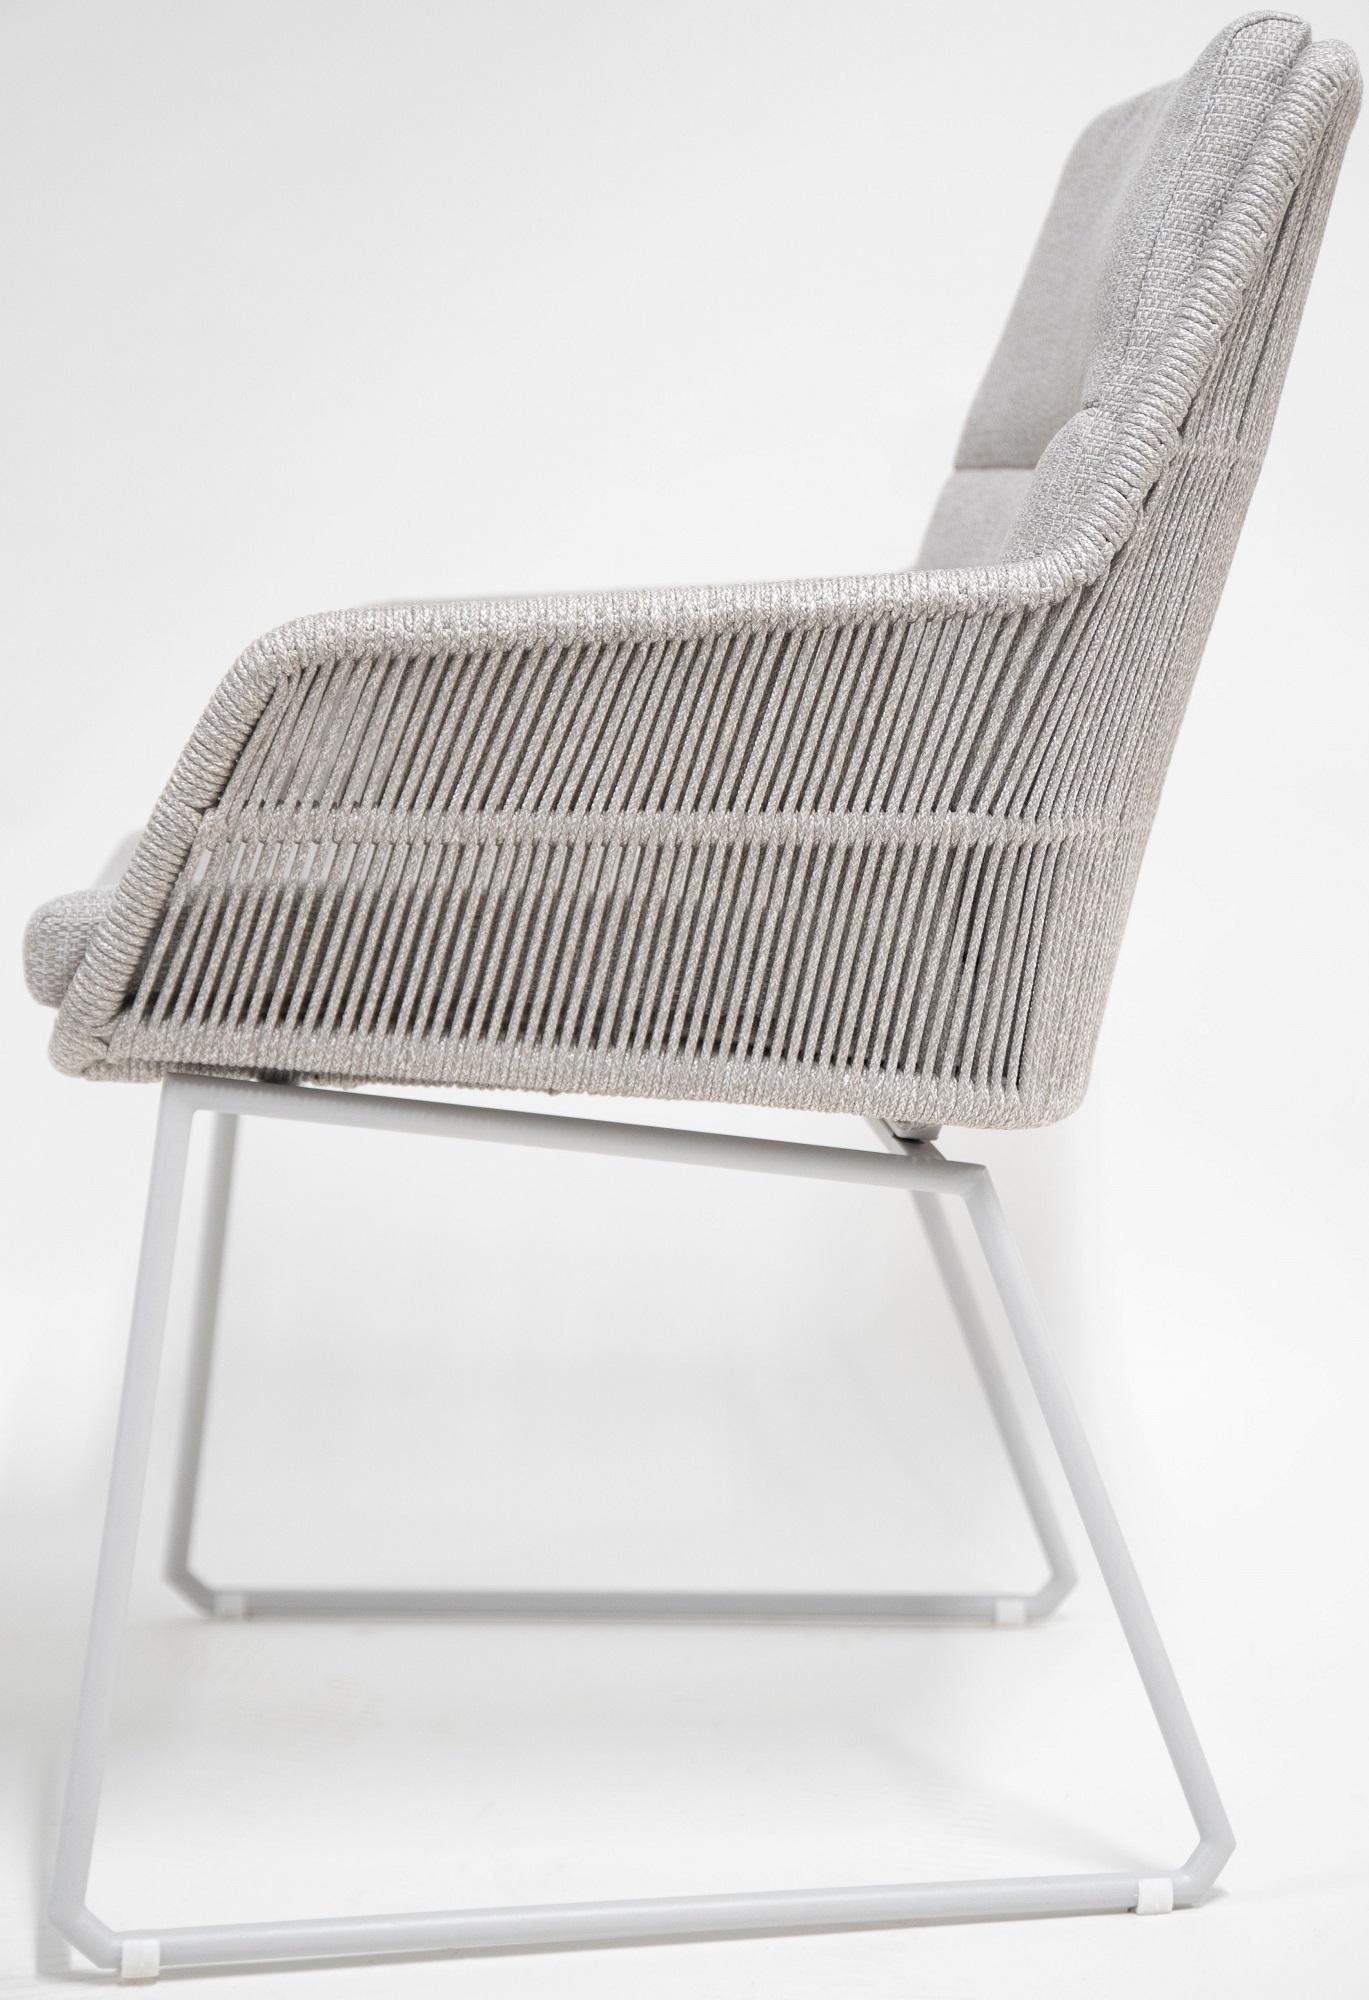 cut out of rope weave garden dining chairs with white aluminium frames for patio outdoor dining